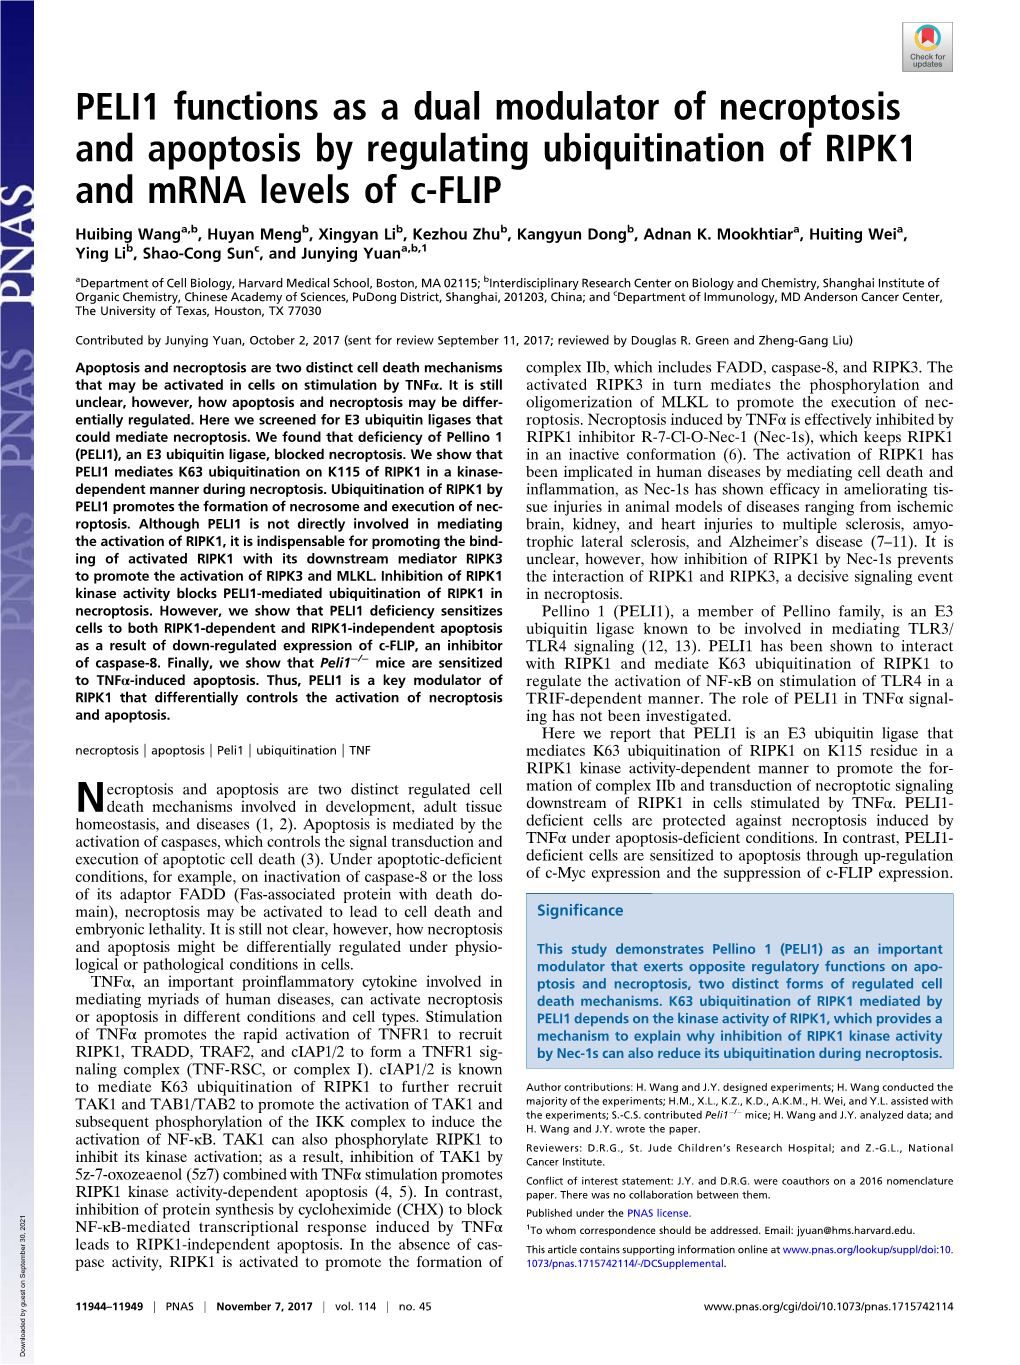 PELI1 Functions As a Dual Modulator of Necroptosis and Apoptosis by Regulating Ubiquitination of RIPK1 and Mrna Levels of C-FLIP